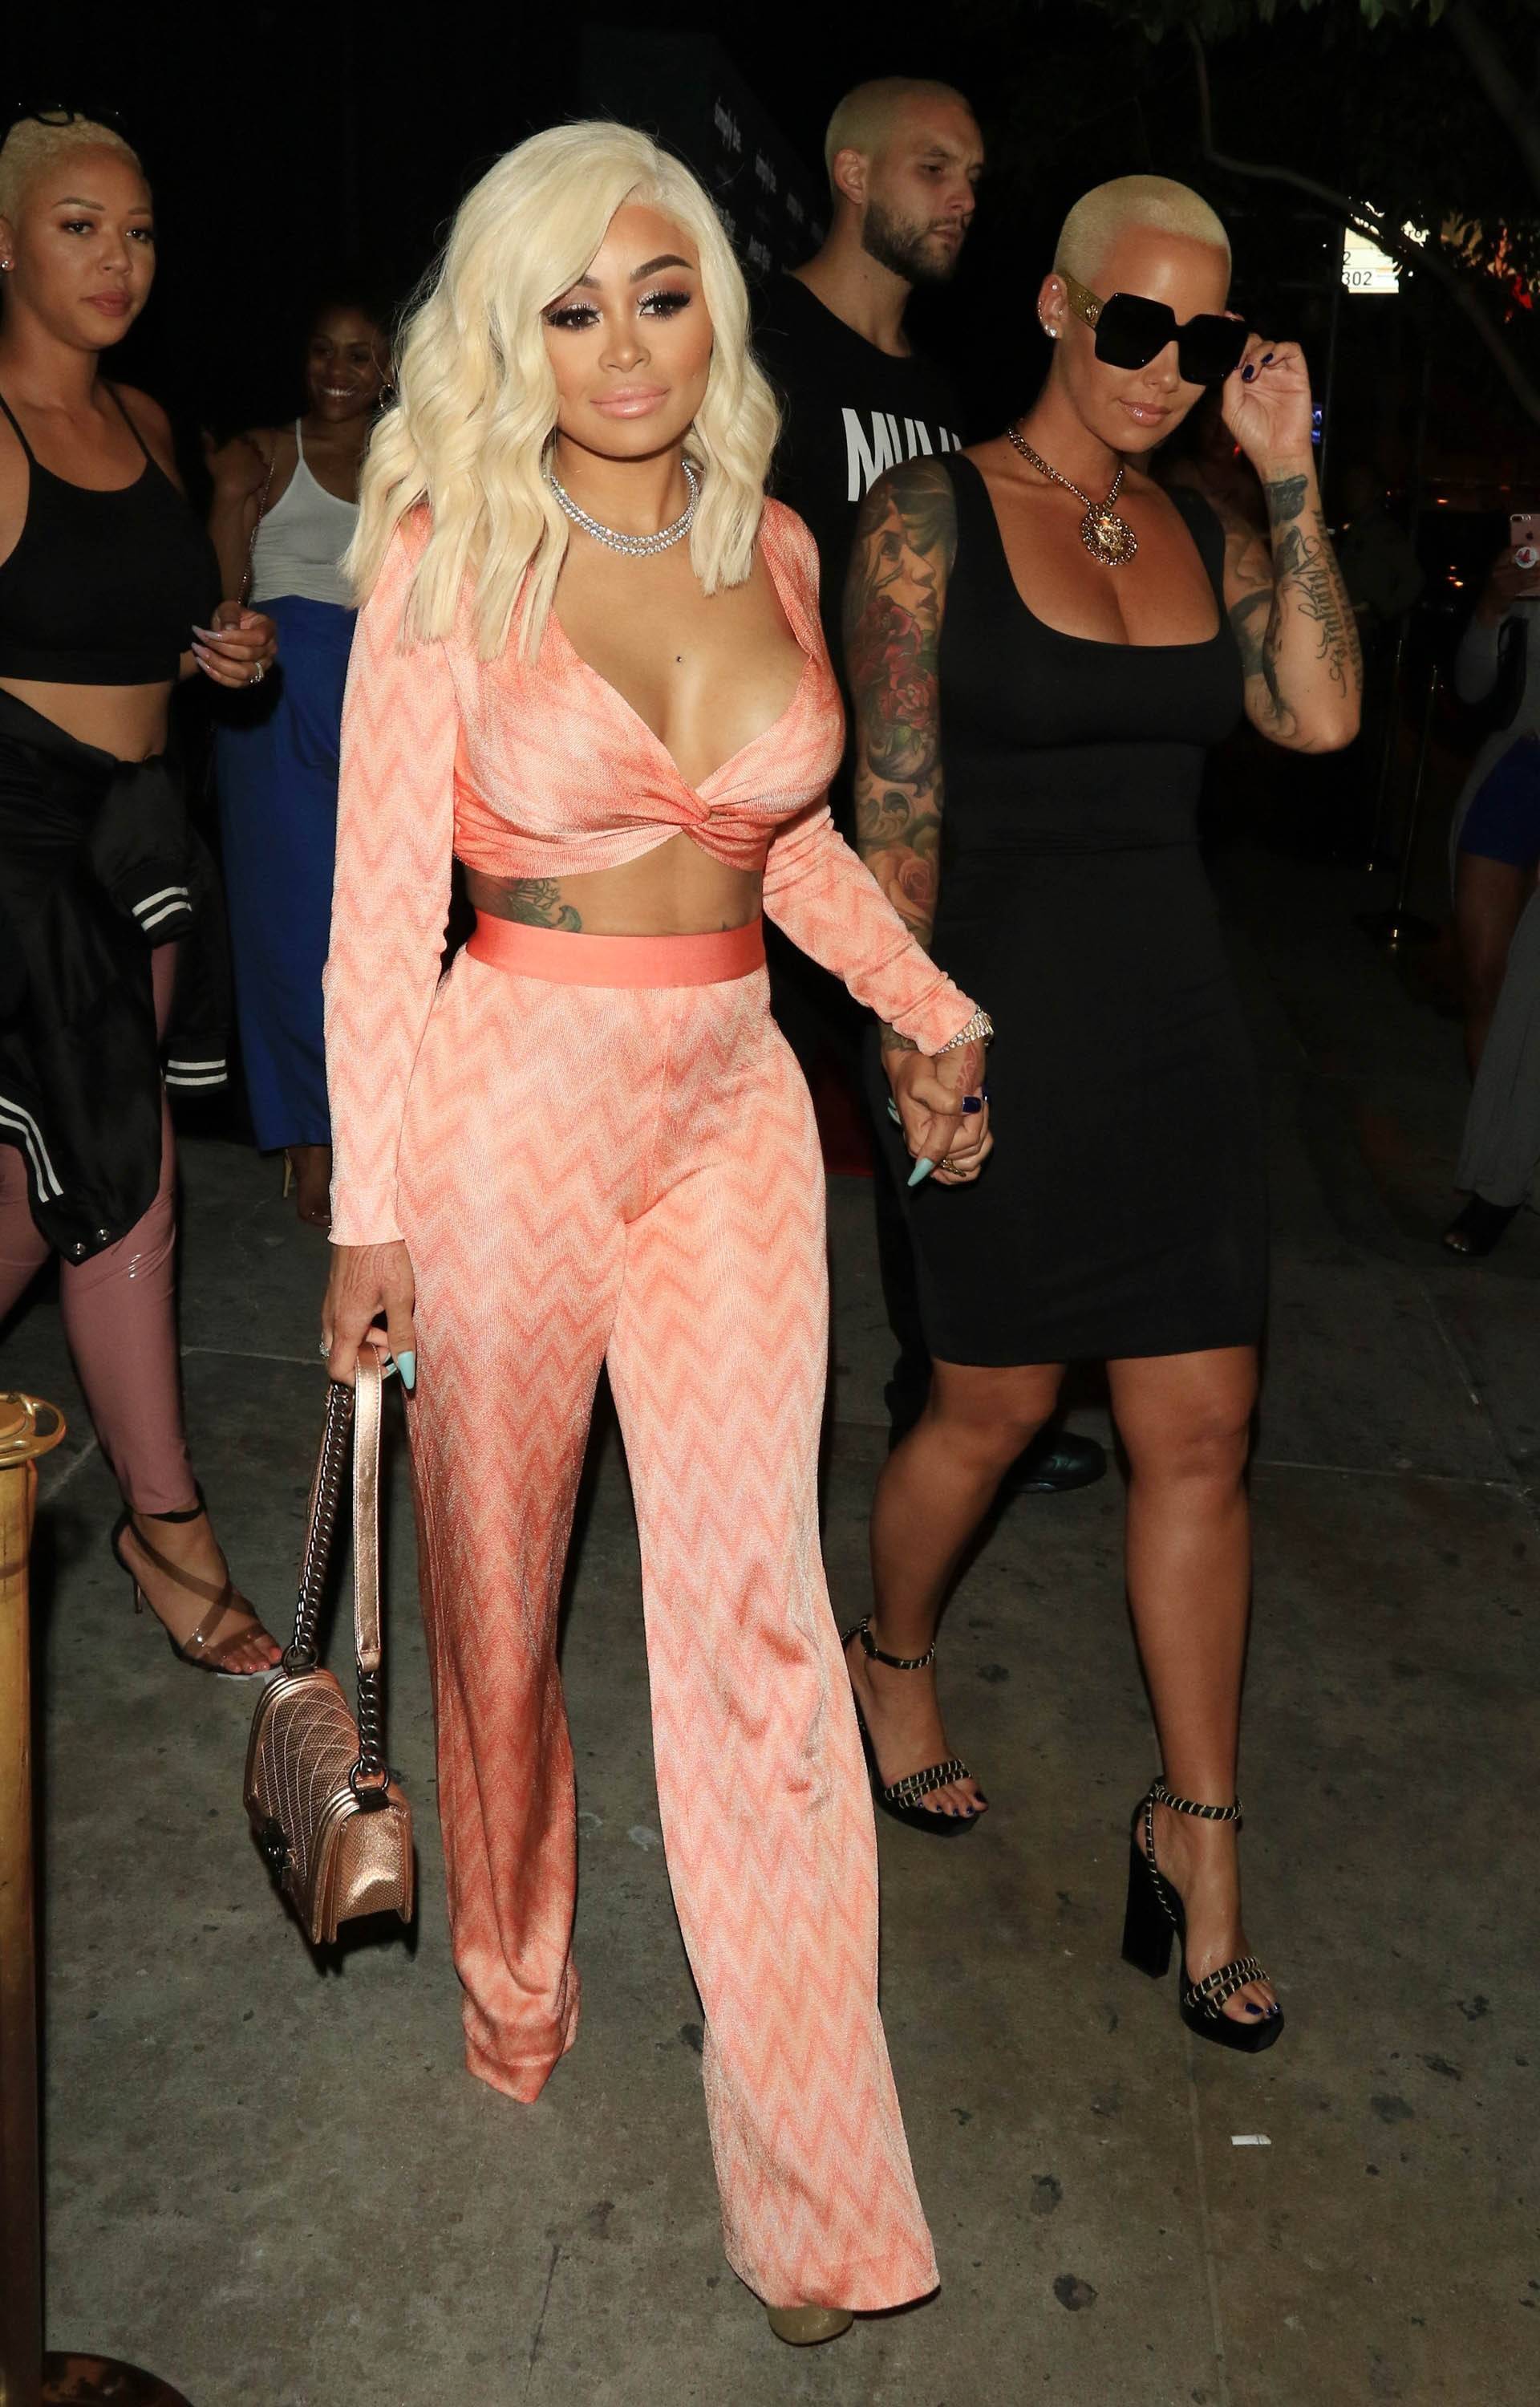 Blac Chyna and Amber Rose sighting - Los Angeles